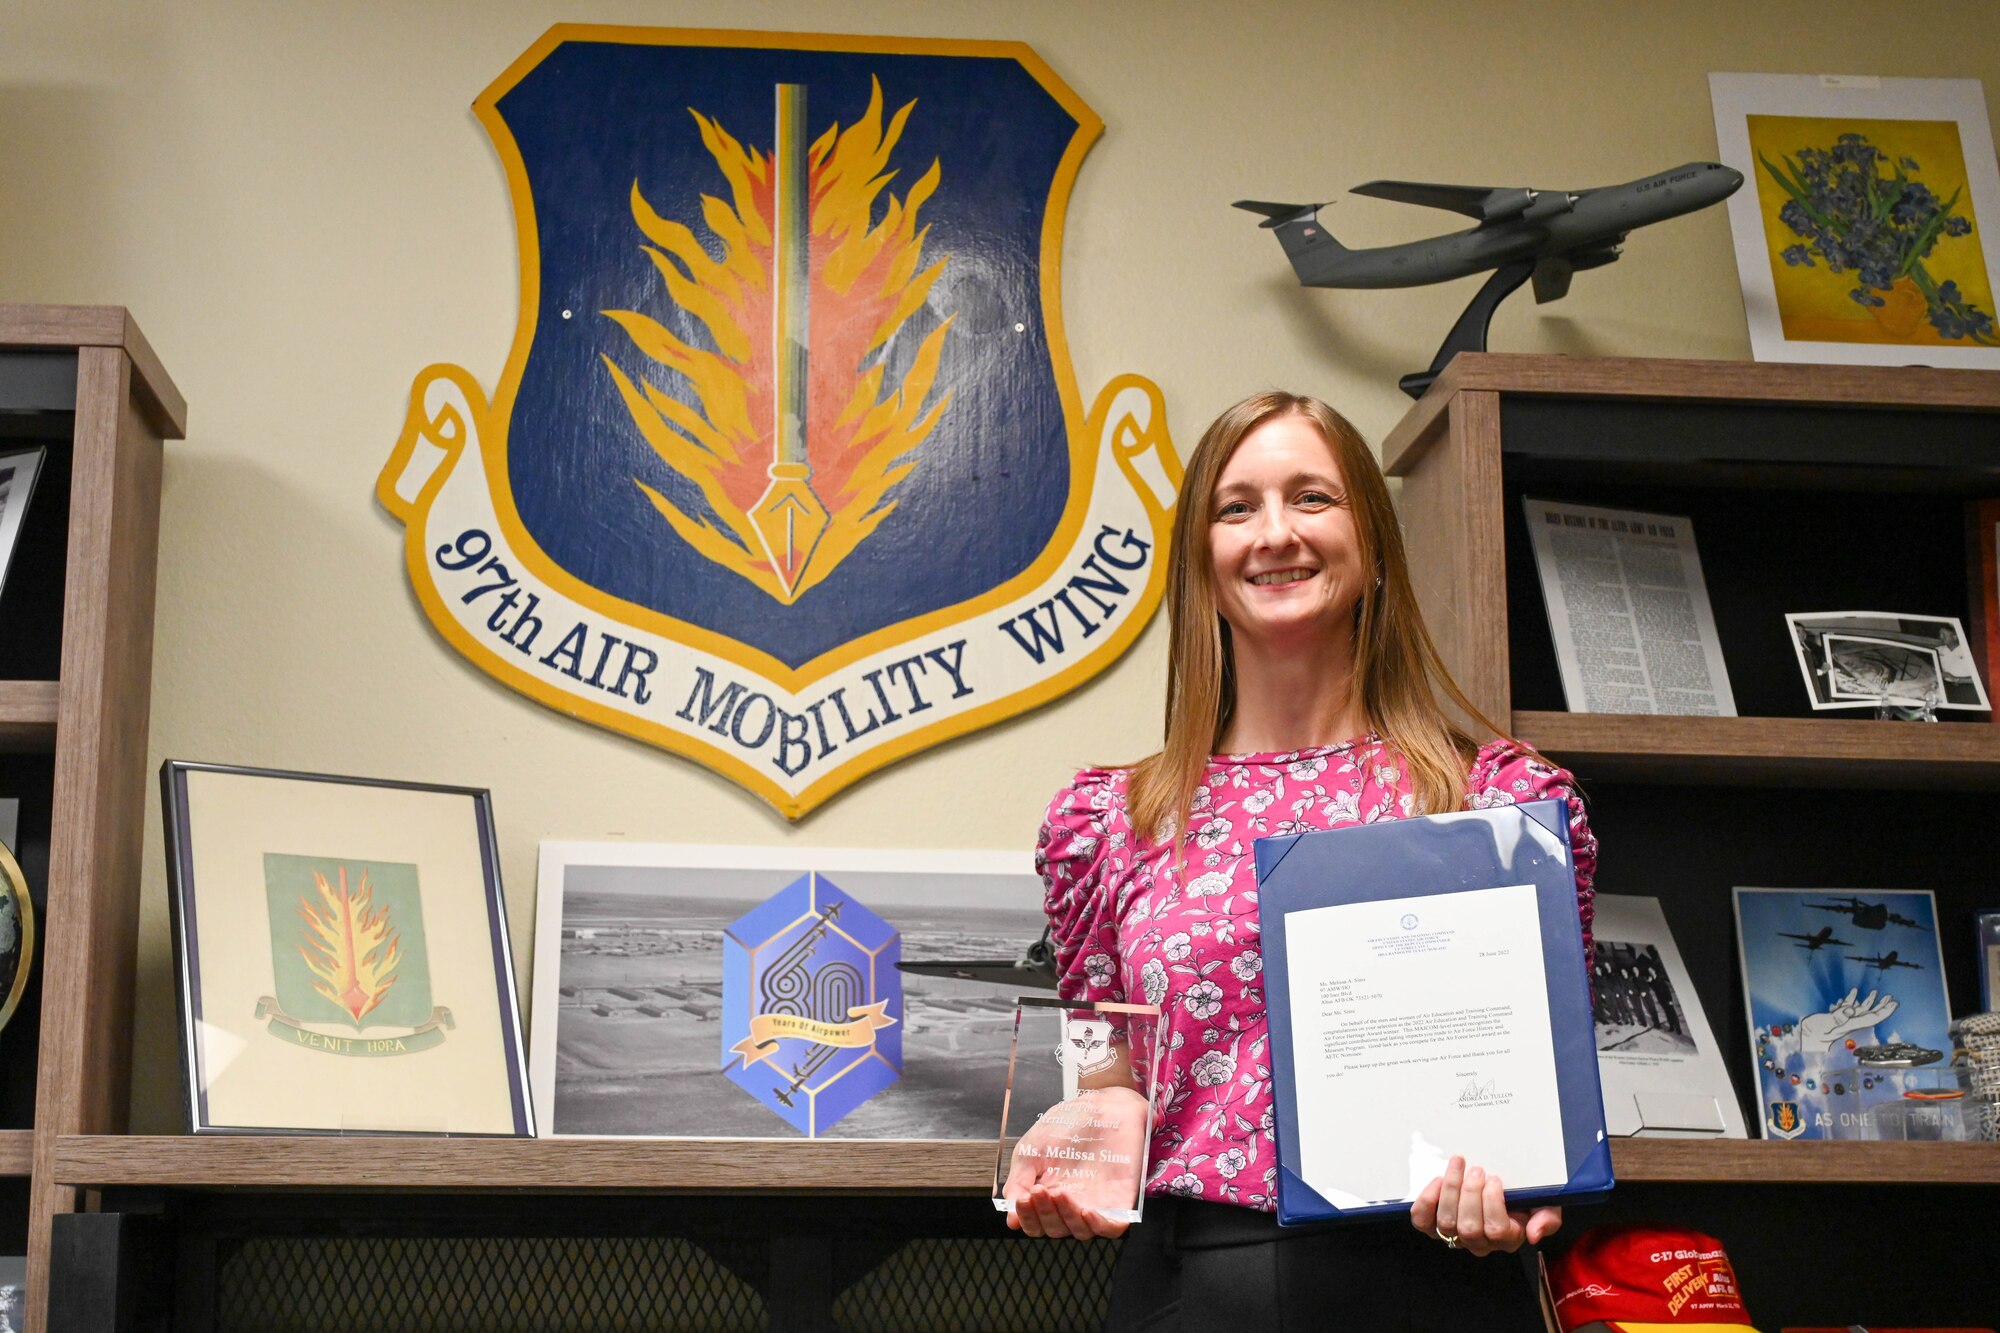 Melissa Sims, 97th Air Mobility Wing historian, poses for a photo at Altus Air Force Base, Oklahoma, Sept. 12, 2022. Sims was awarded the Air Education and Training Command Air Force Heritage Award for outstanding performance throughout the wing. (U.S. Air Force photo by Senior Airman Trenton Jancze)